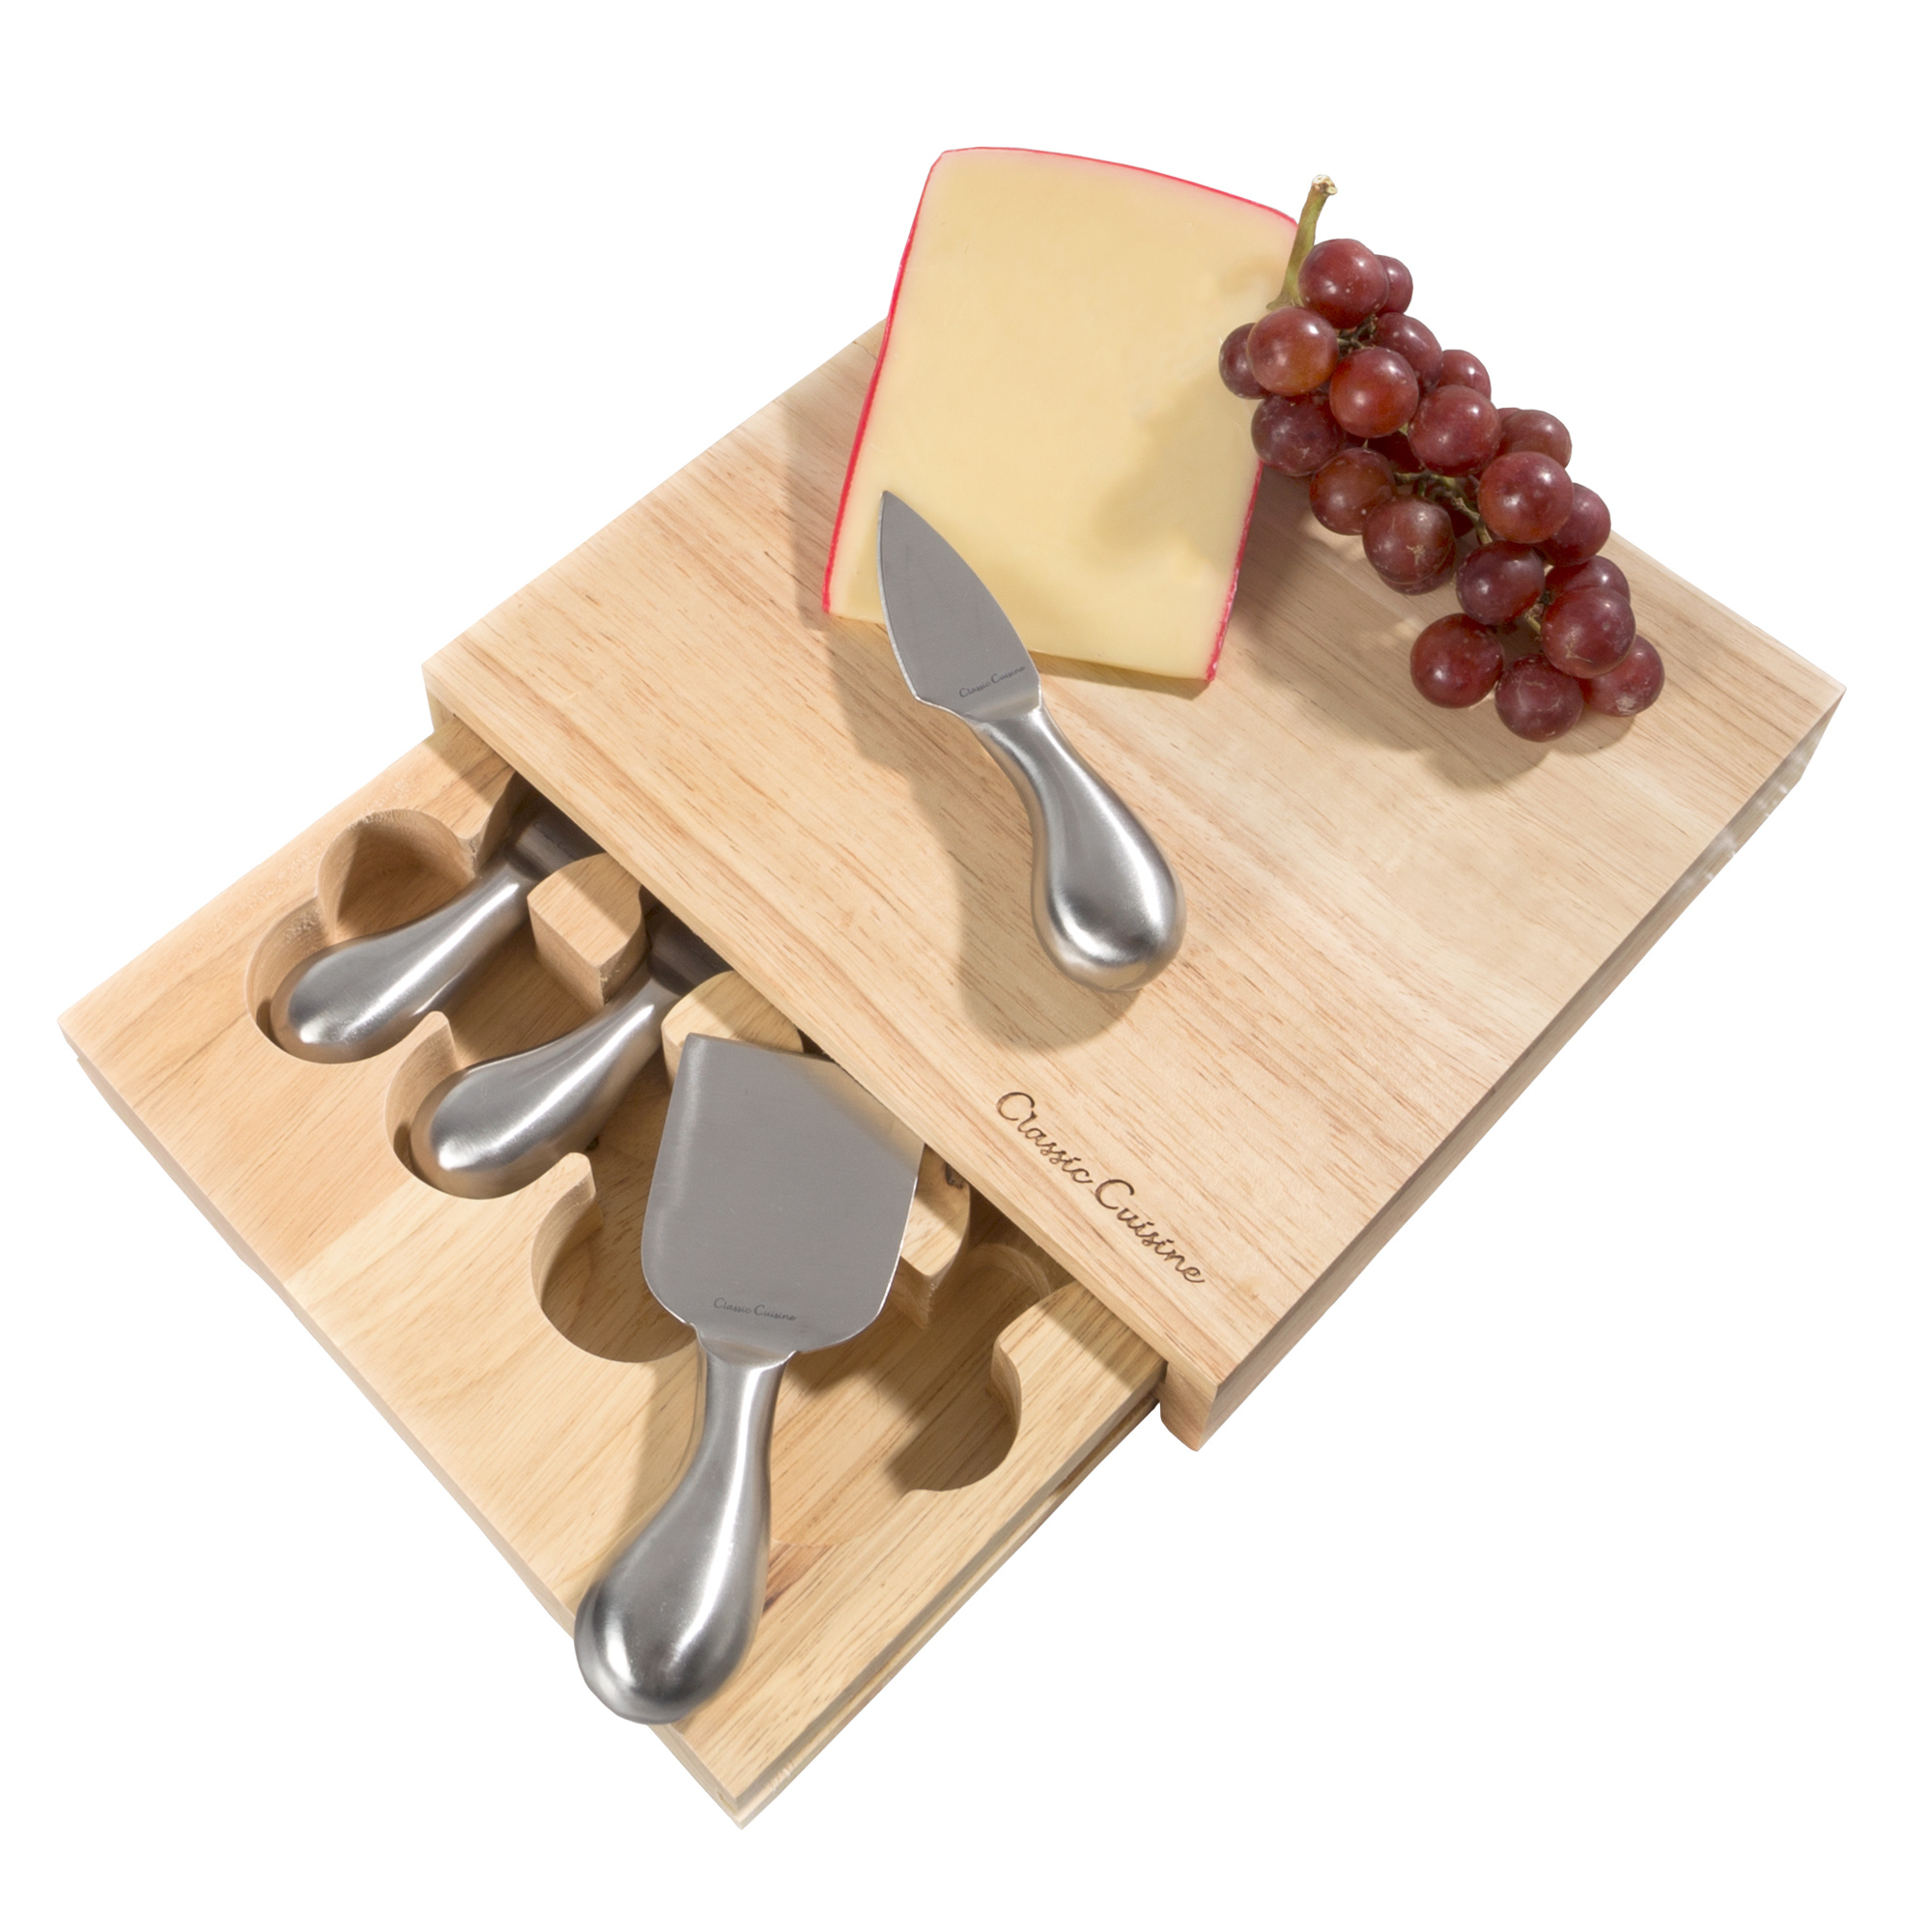 Cheese Board 5 piece Set with Stainless Steel Tools and Wood Cutting Block Great Gift 8.6 x 8.25